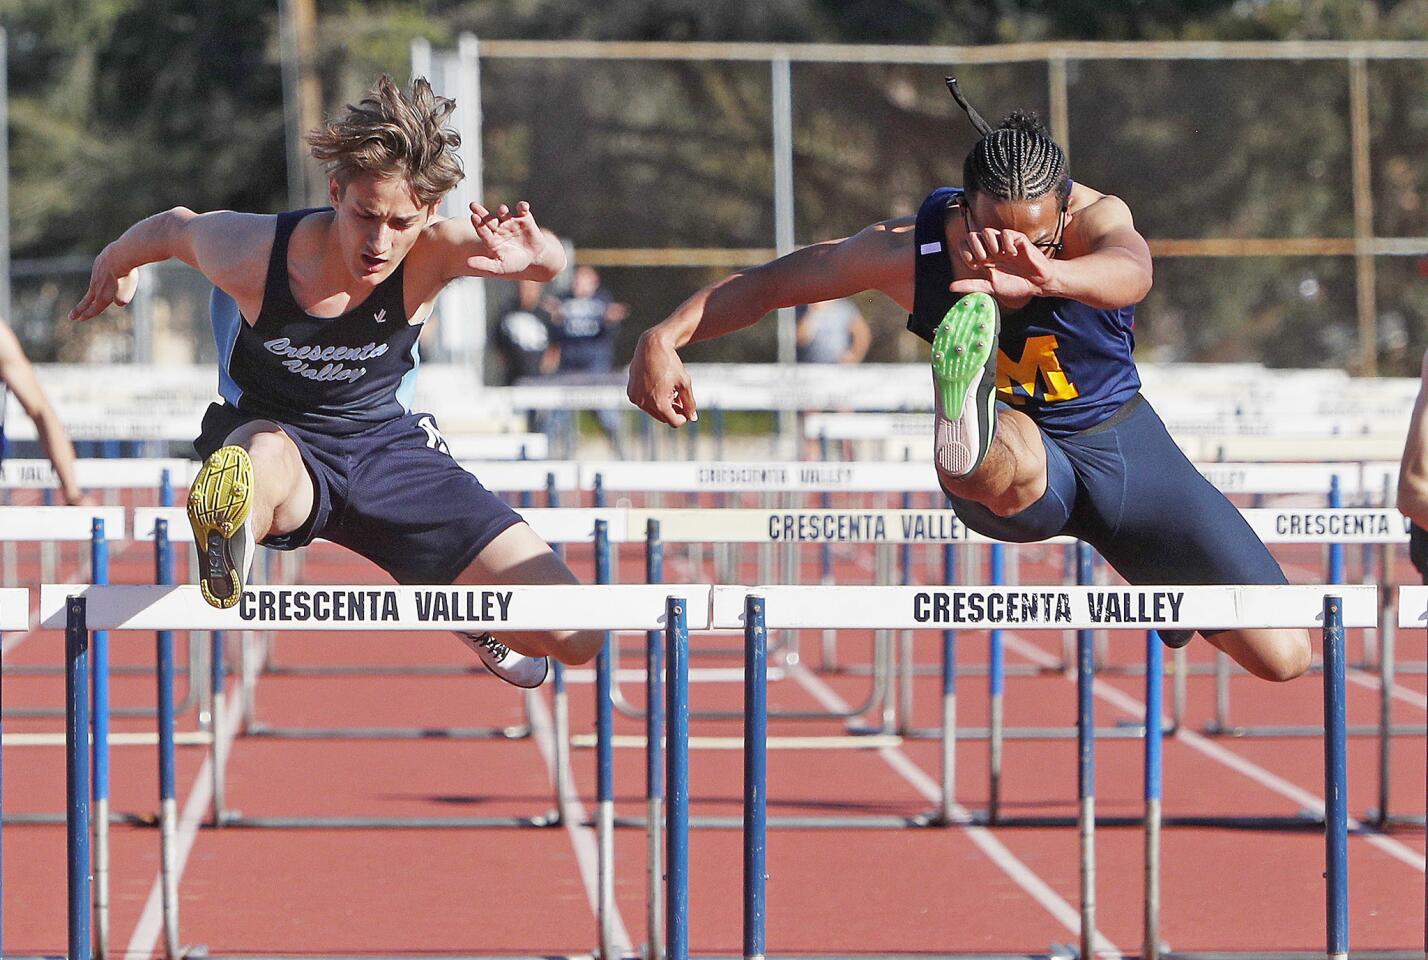 Crescenta Valley's Vince Lieberman is just ahead of Muir's Reggie Miles in the boys' 110 hurdles on the final hurdle in a Pacific League track meet at Crescenta Valley High School on Thursday, March 14, 2019. Lieberman beat Miles by 0.06 seconds. The meet featured schools from Crescenta Valley, Burbank, and Muir.